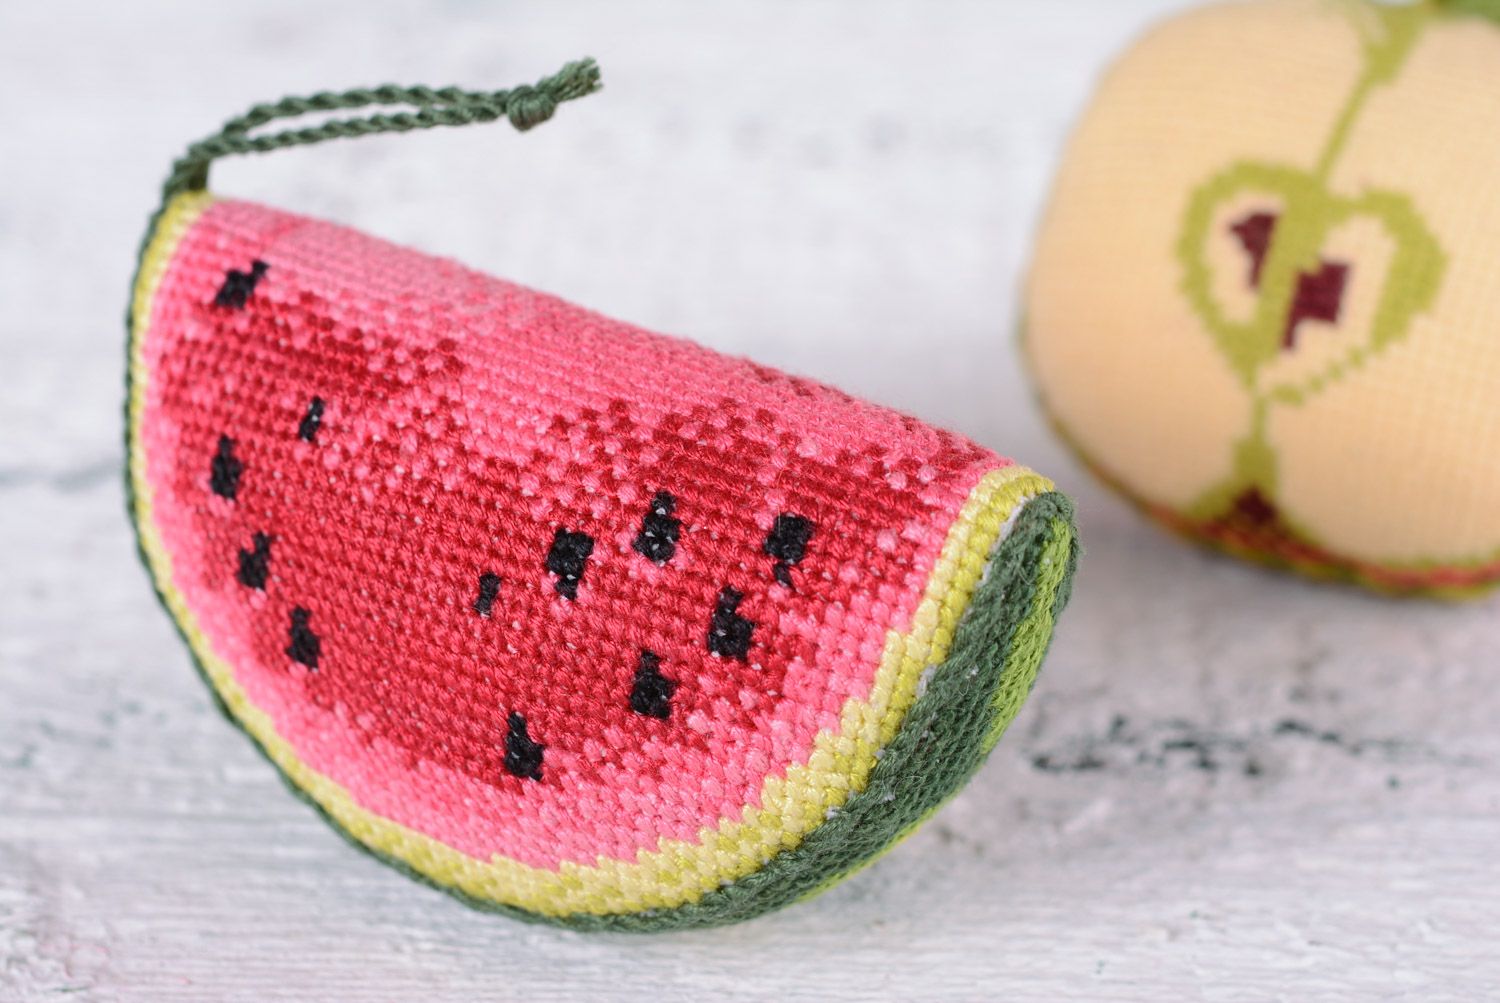 Handmade cross stitched soft pincushion in the shape of water-melon slice  photo 1